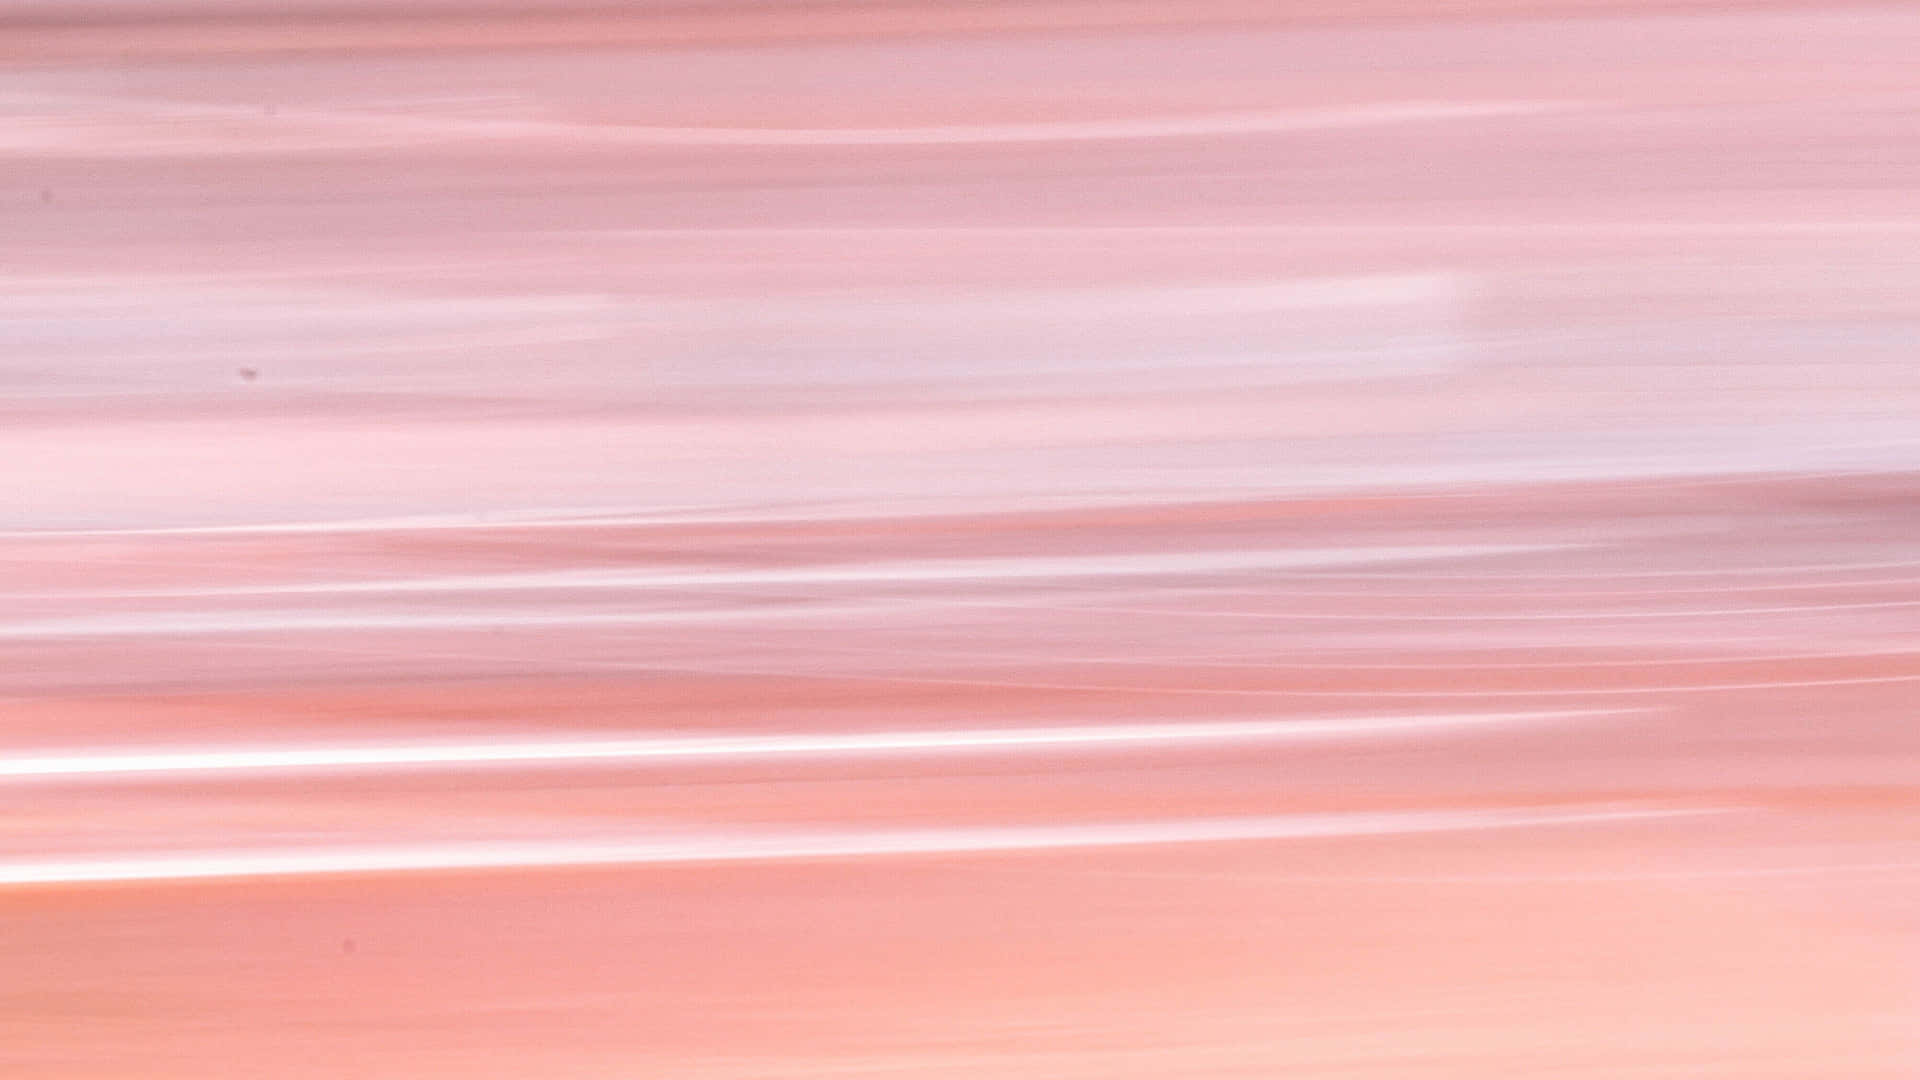 A Pink Abstract Painting With A Blurred Background Wallpaper